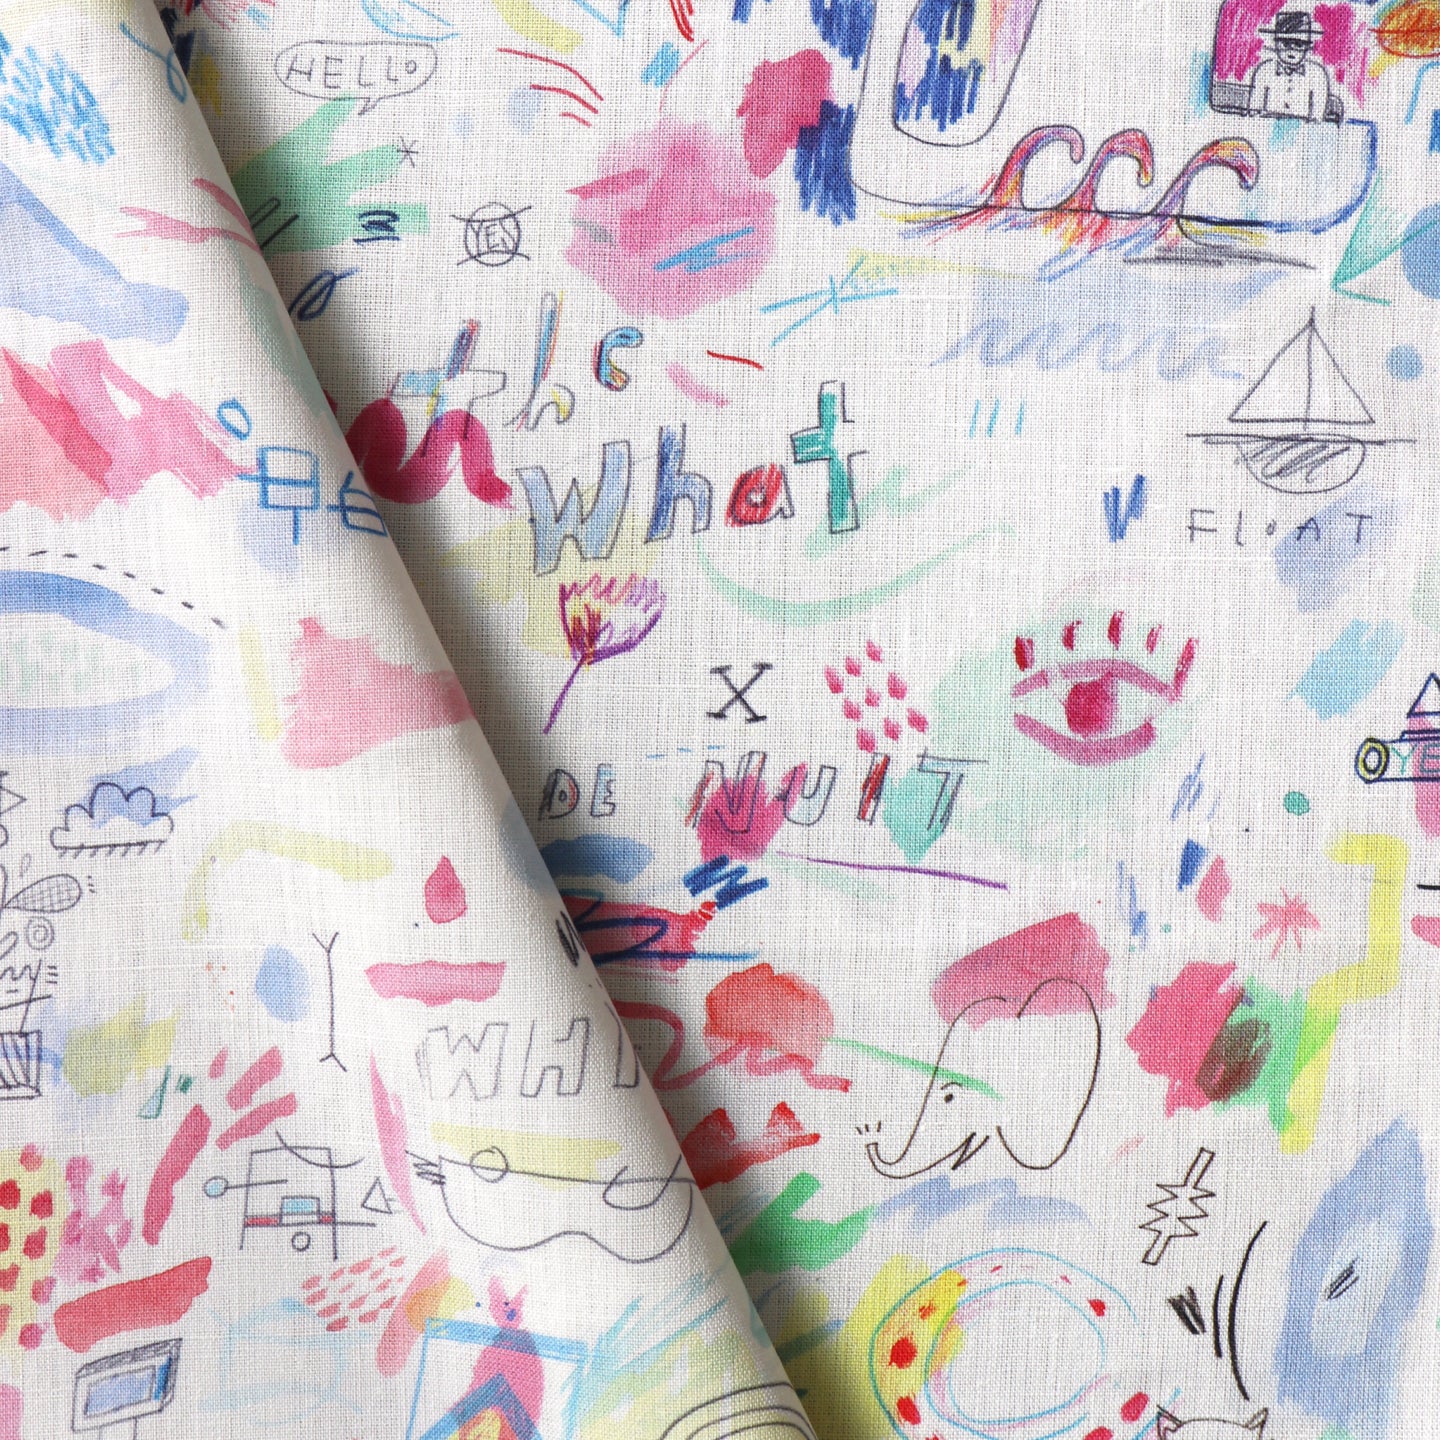 A close up of a piece of fabric with drawings on it